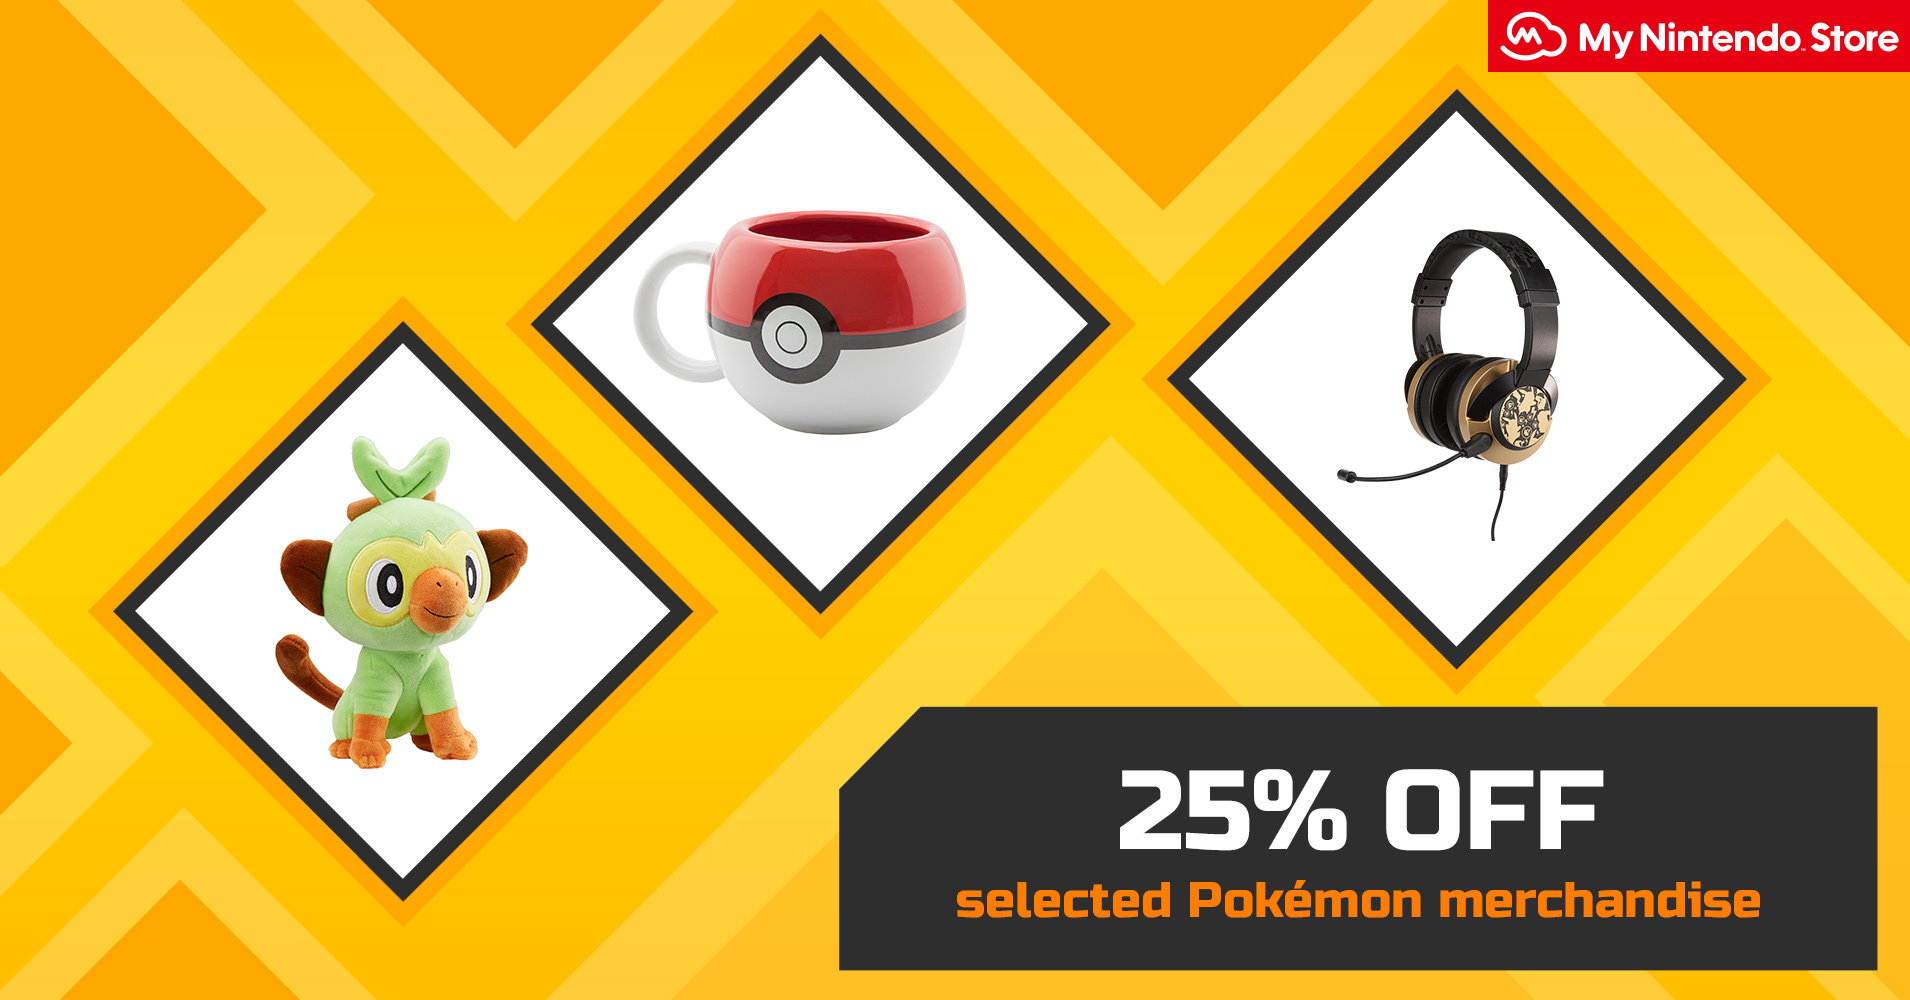 Nintendo Uk From Soft Toys And Mugs To Headphones And Accessories Shop The My Nintendo Store Black Friday Sale And Get 25 Off Selected Pokemon Merchandise T Co Wcemgnaukv Shop All